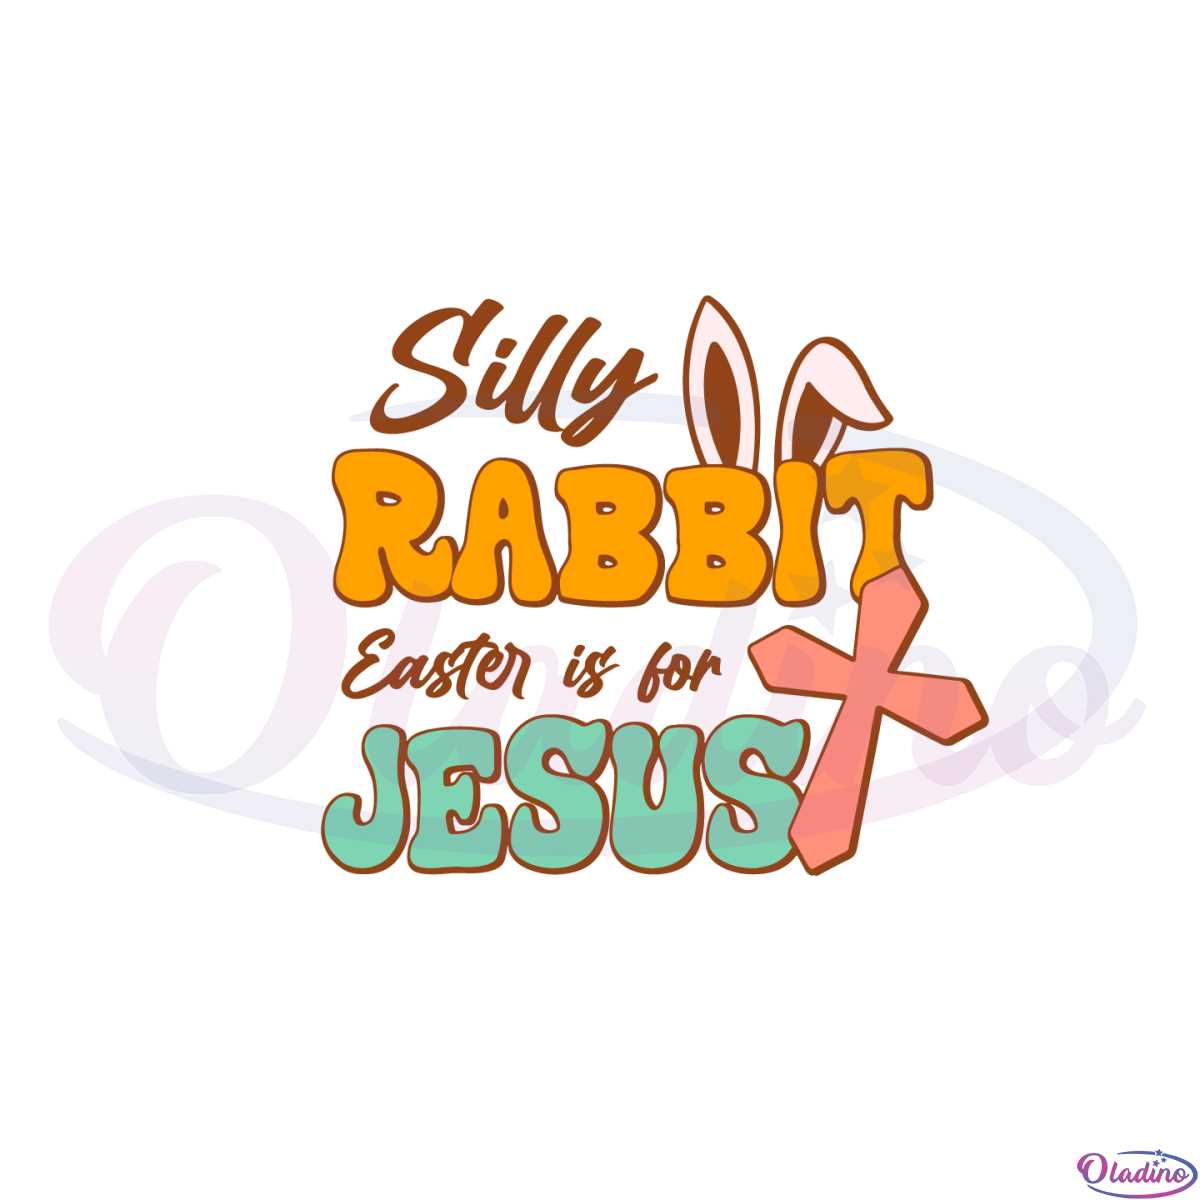 christian-easter-day-silly-rabbit-easter-is-for-jesus-svg-cutting-files